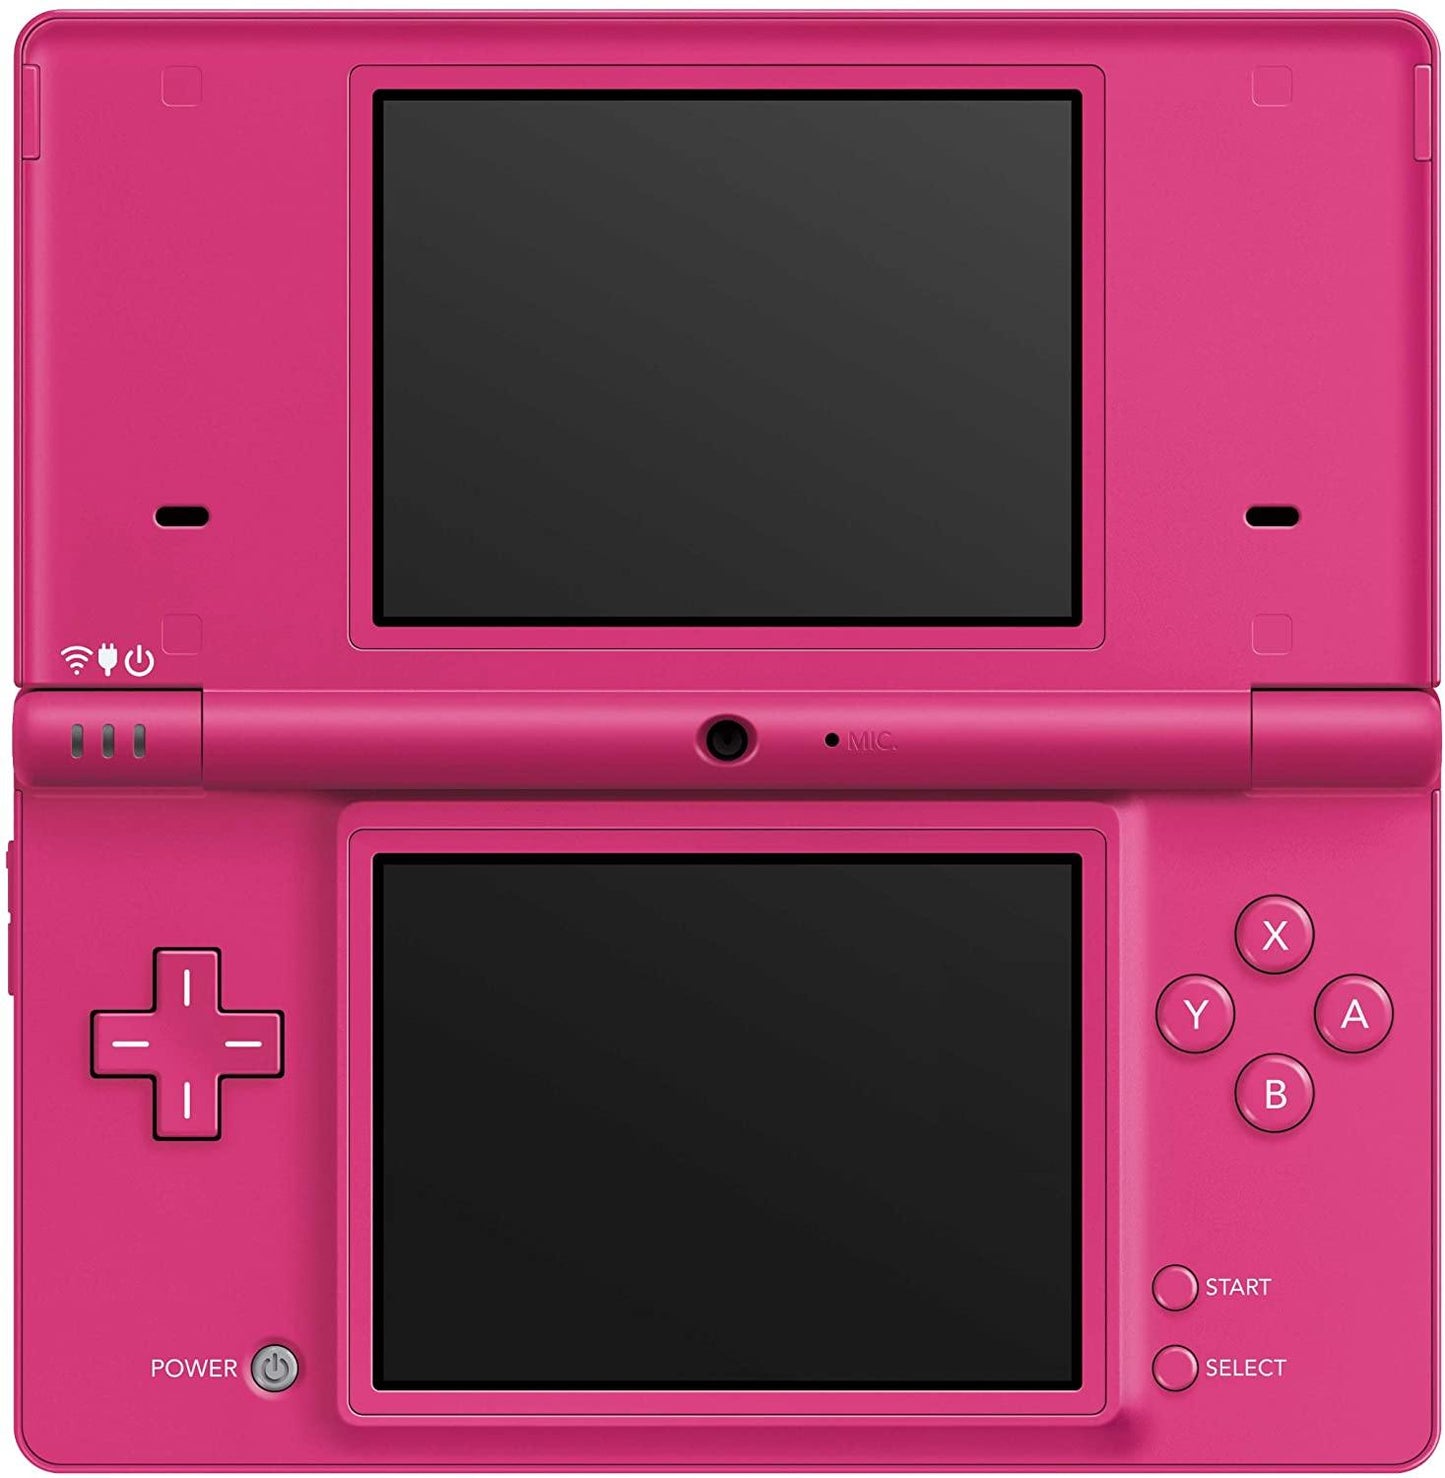 Nintendo DSi Handheld Console - USED (Pink) - Offer Games